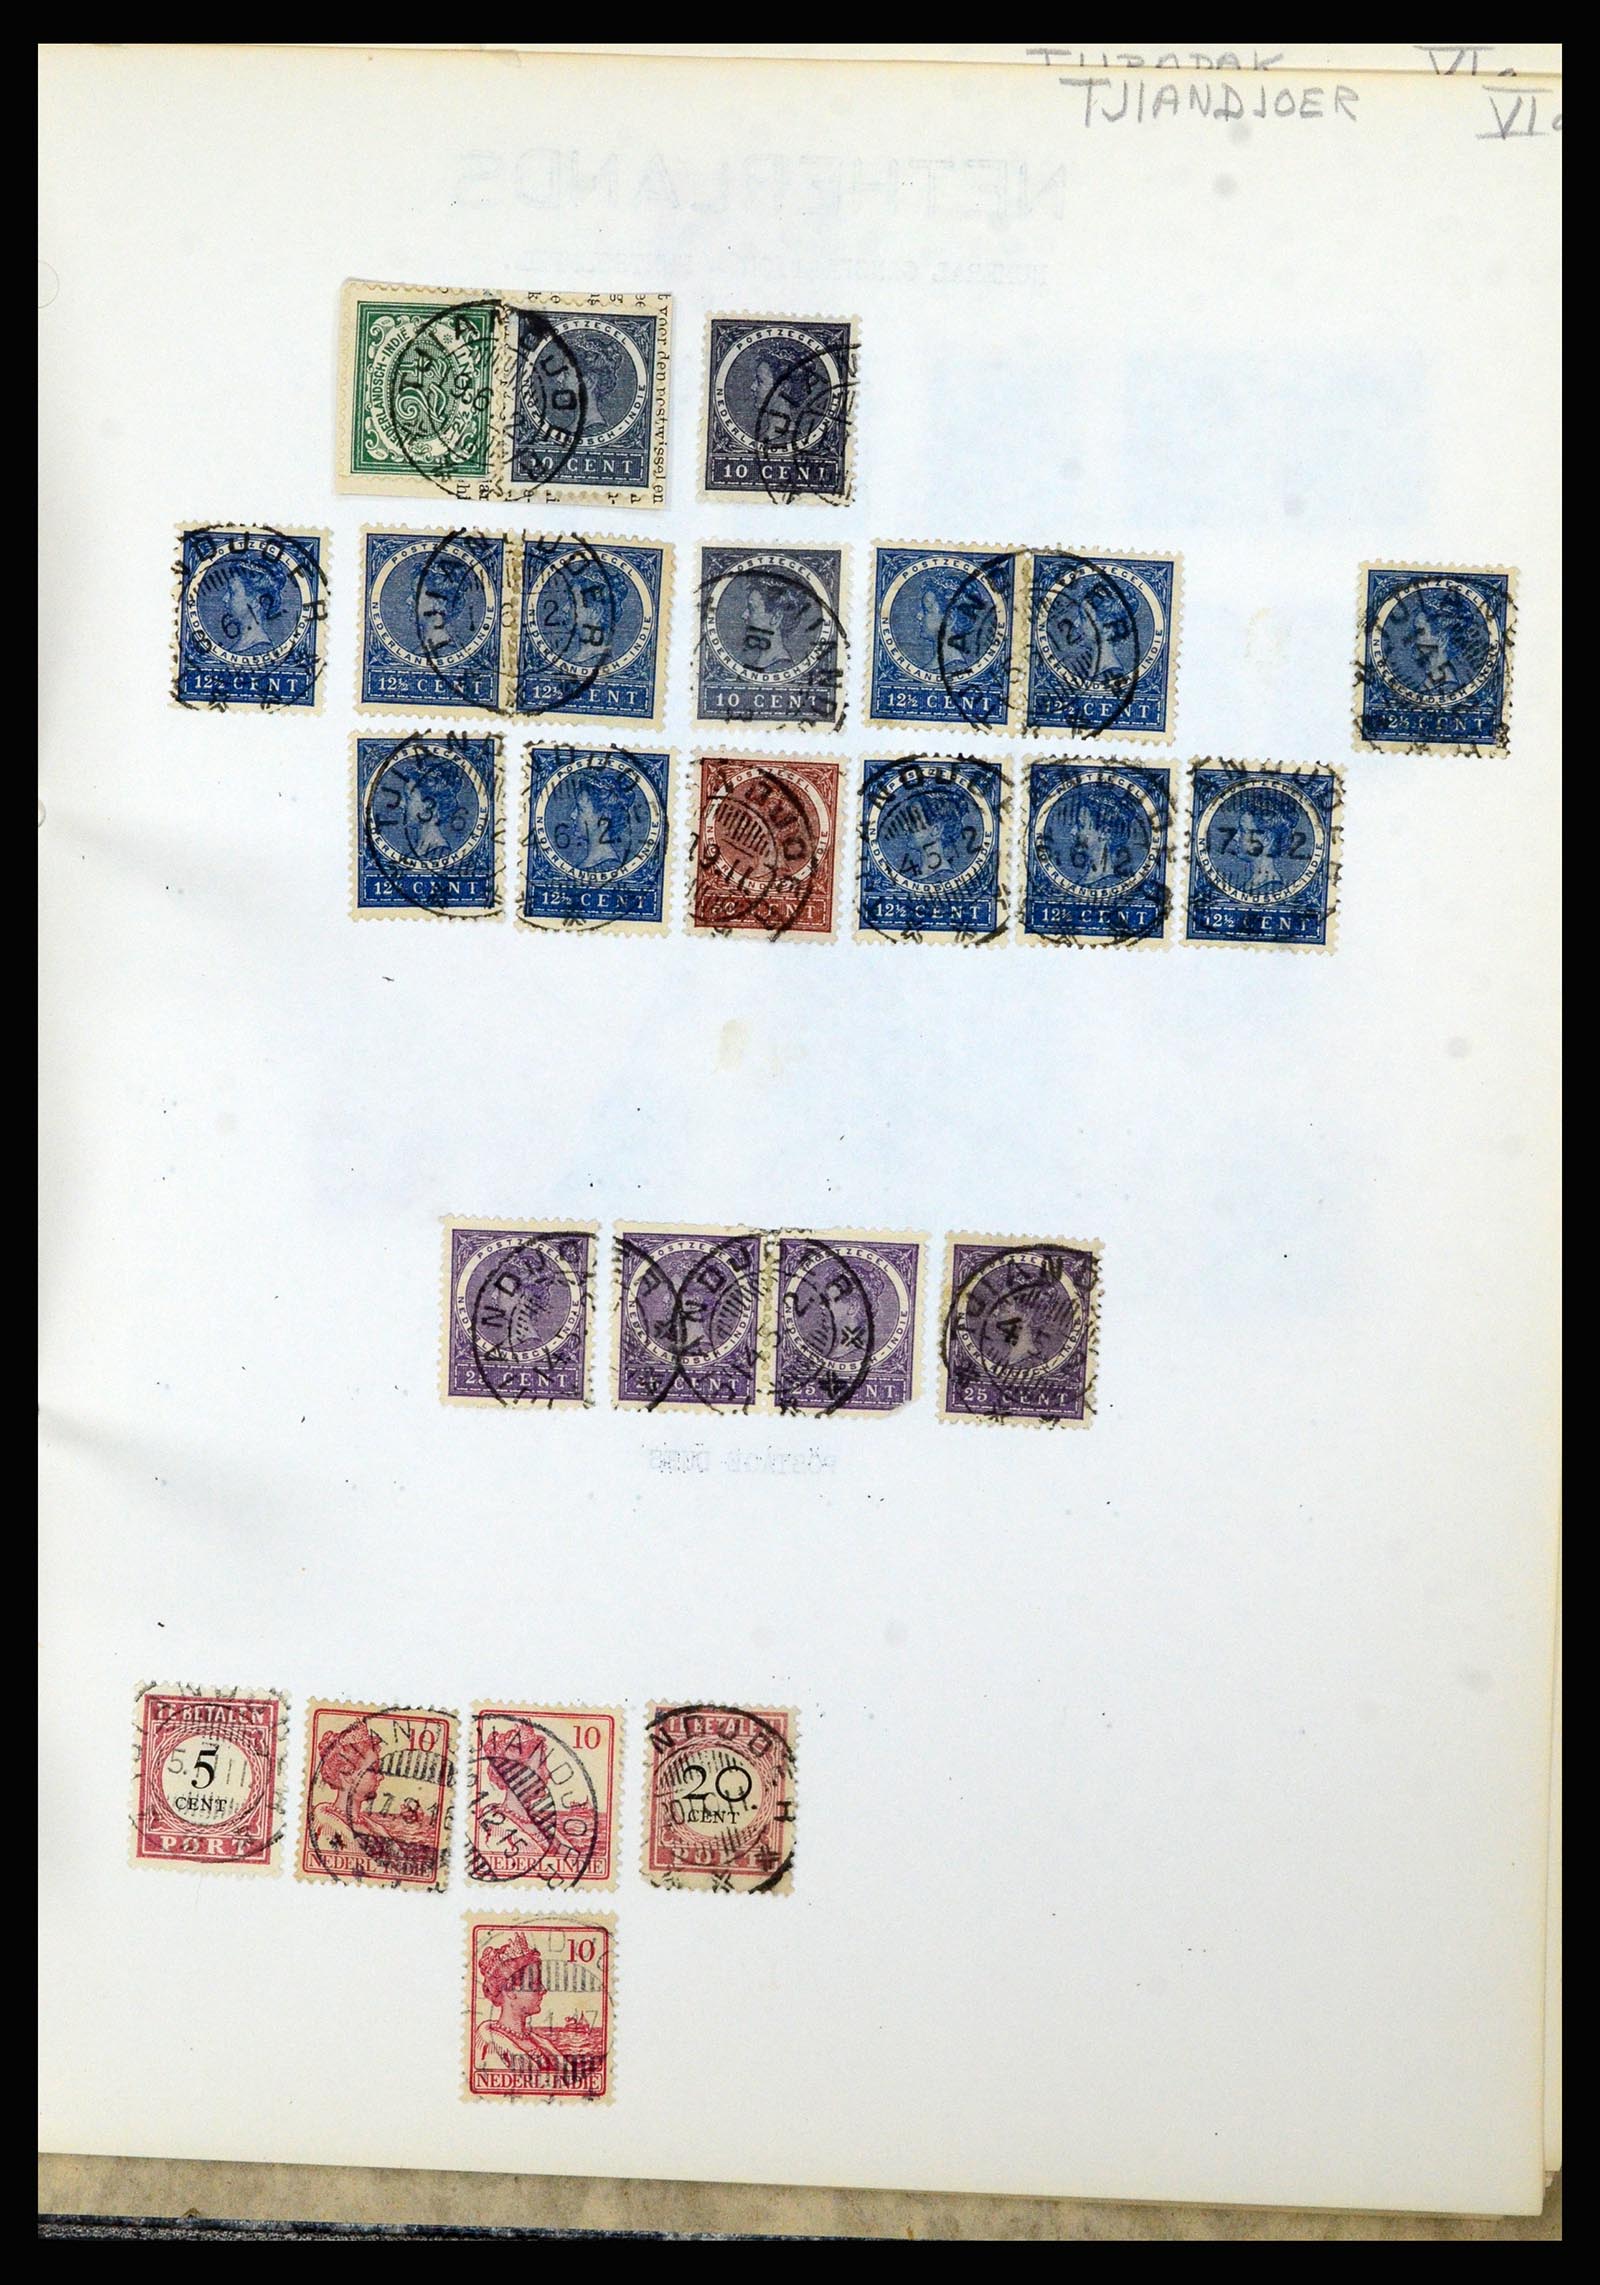 36841 166 - Stamp collection 36841 Dutch east Indies short bar cancels.